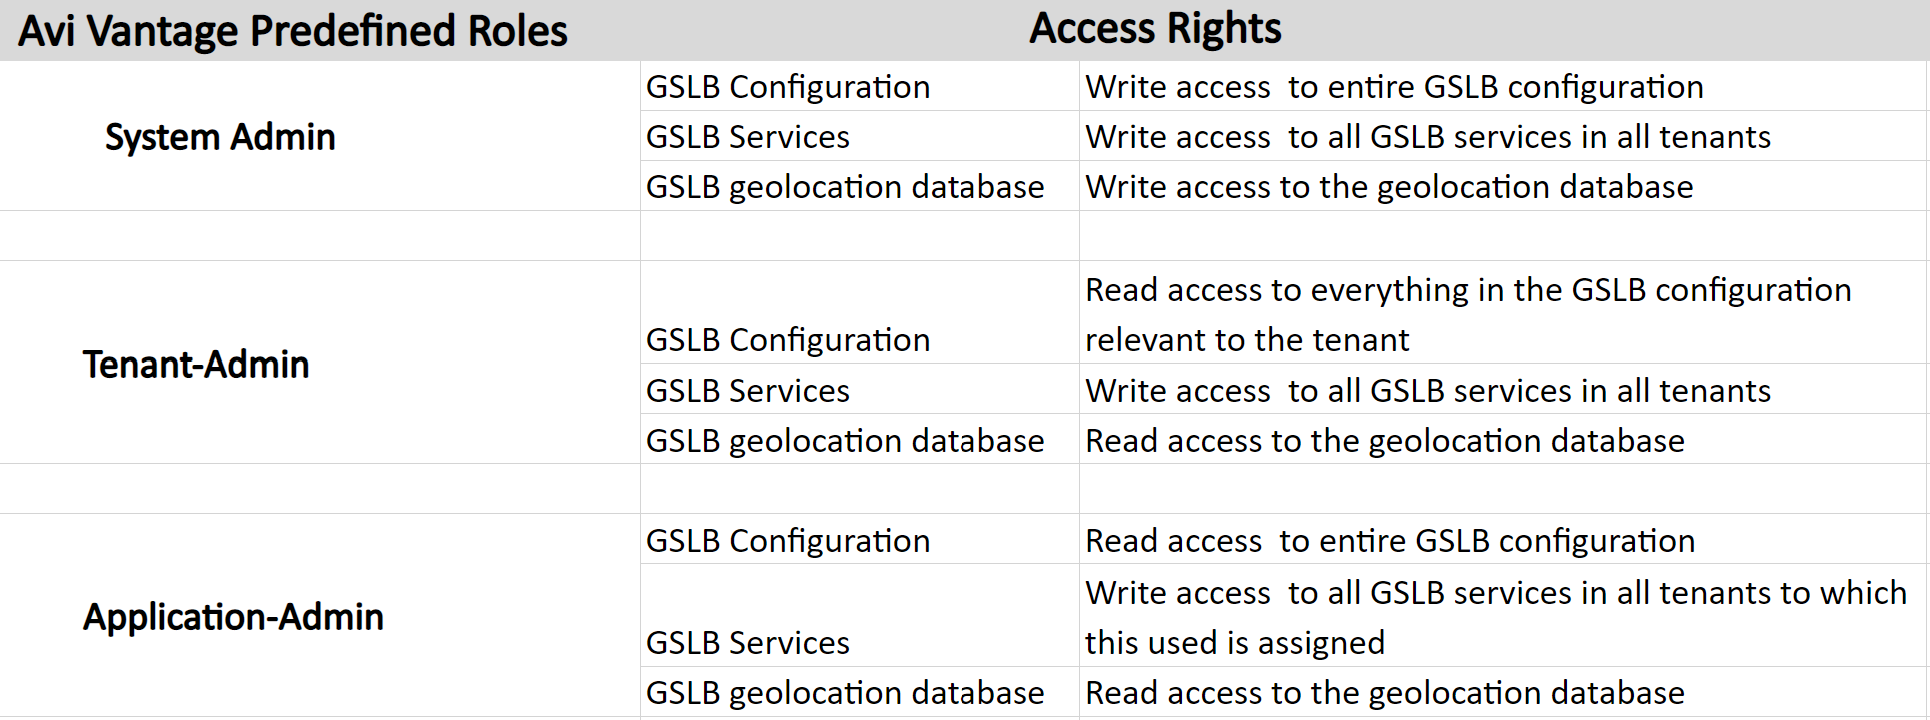 GSLB access rights for three predefined roles